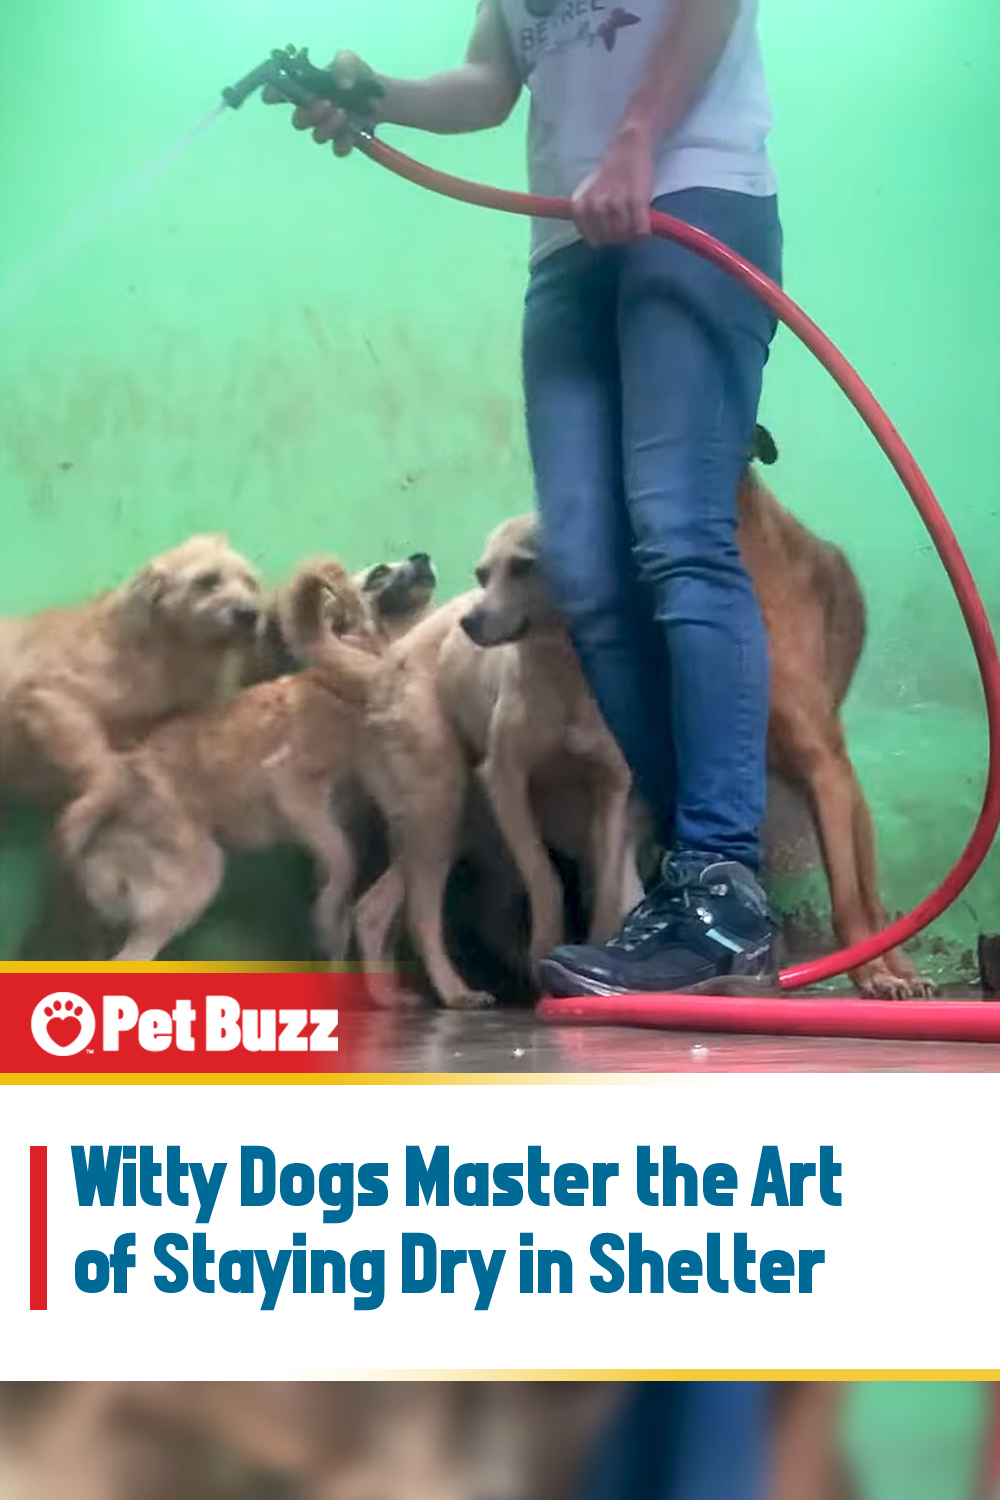 Witty Dogs Master the Art of Staying Dry in Shelter